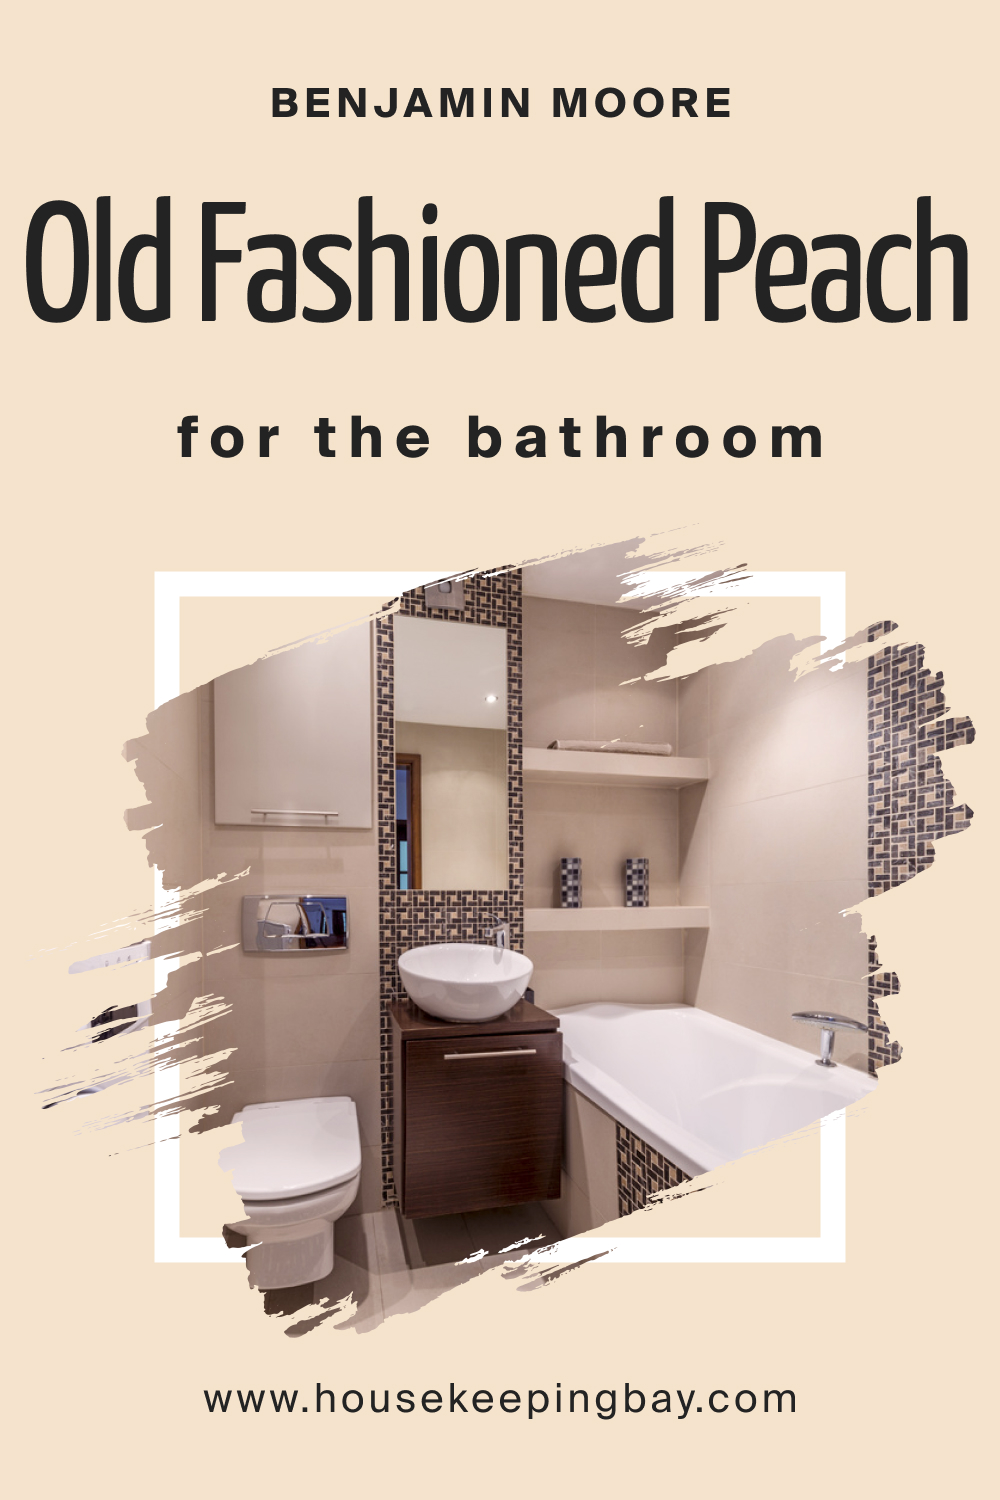 Benjamin Moore. Old Fashioned Peach OC 79 for the Bathroom